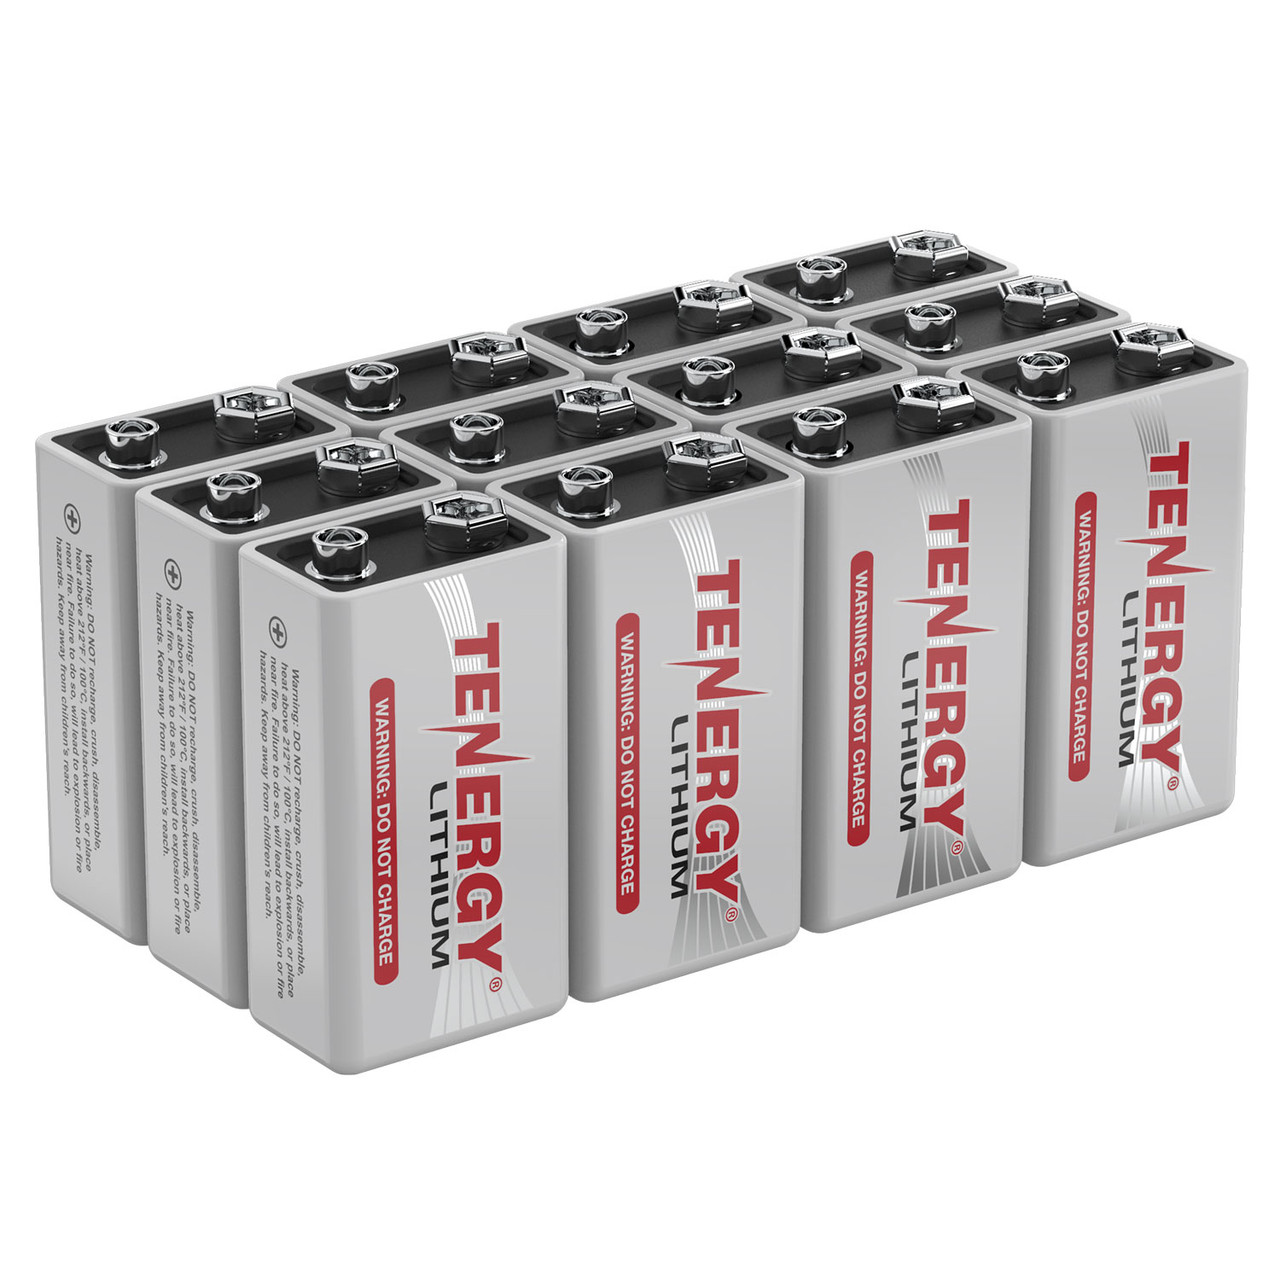 12-Pack, Tenergy 9V Lithium Battery, 1200mah with 10 years shelf life - [Non-Rechargeable]